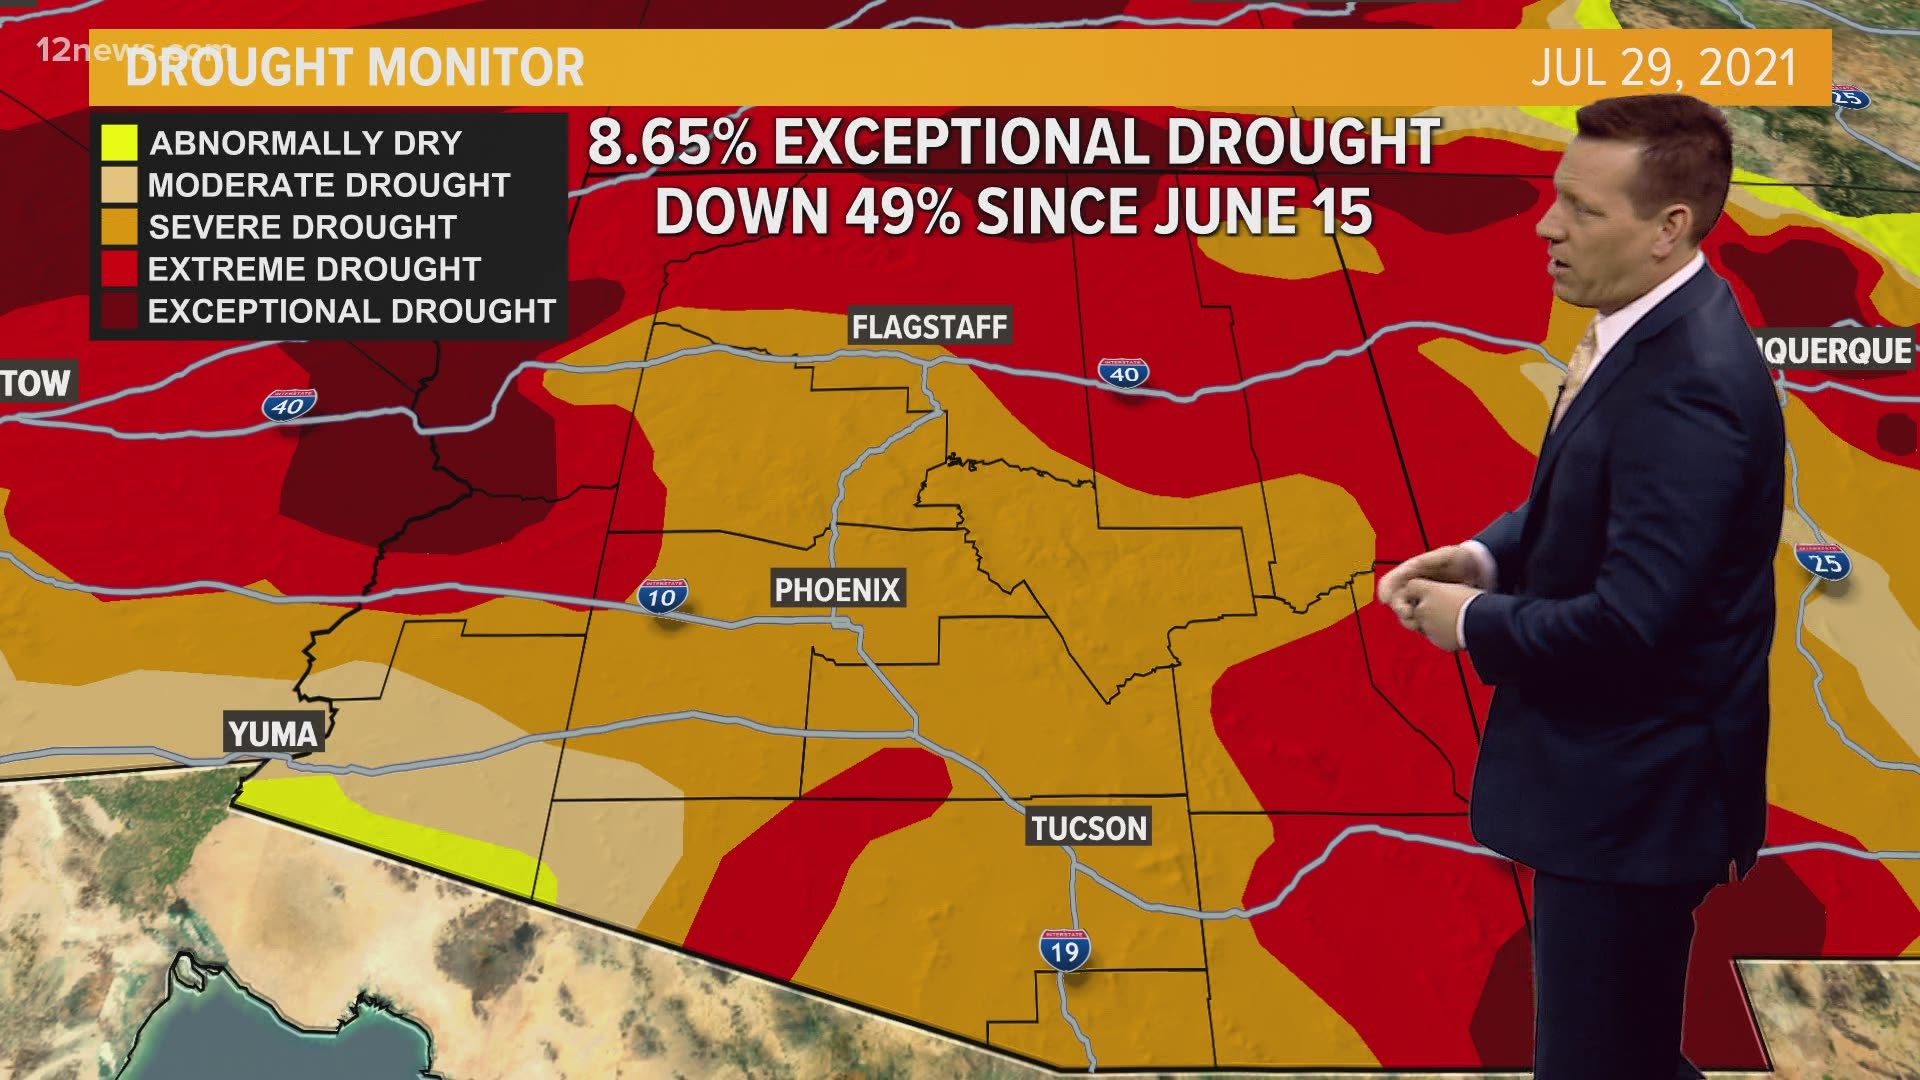 It's been pretty rainy in Arizona, but is that good news for the state's drought? Jamie Kagol explains.